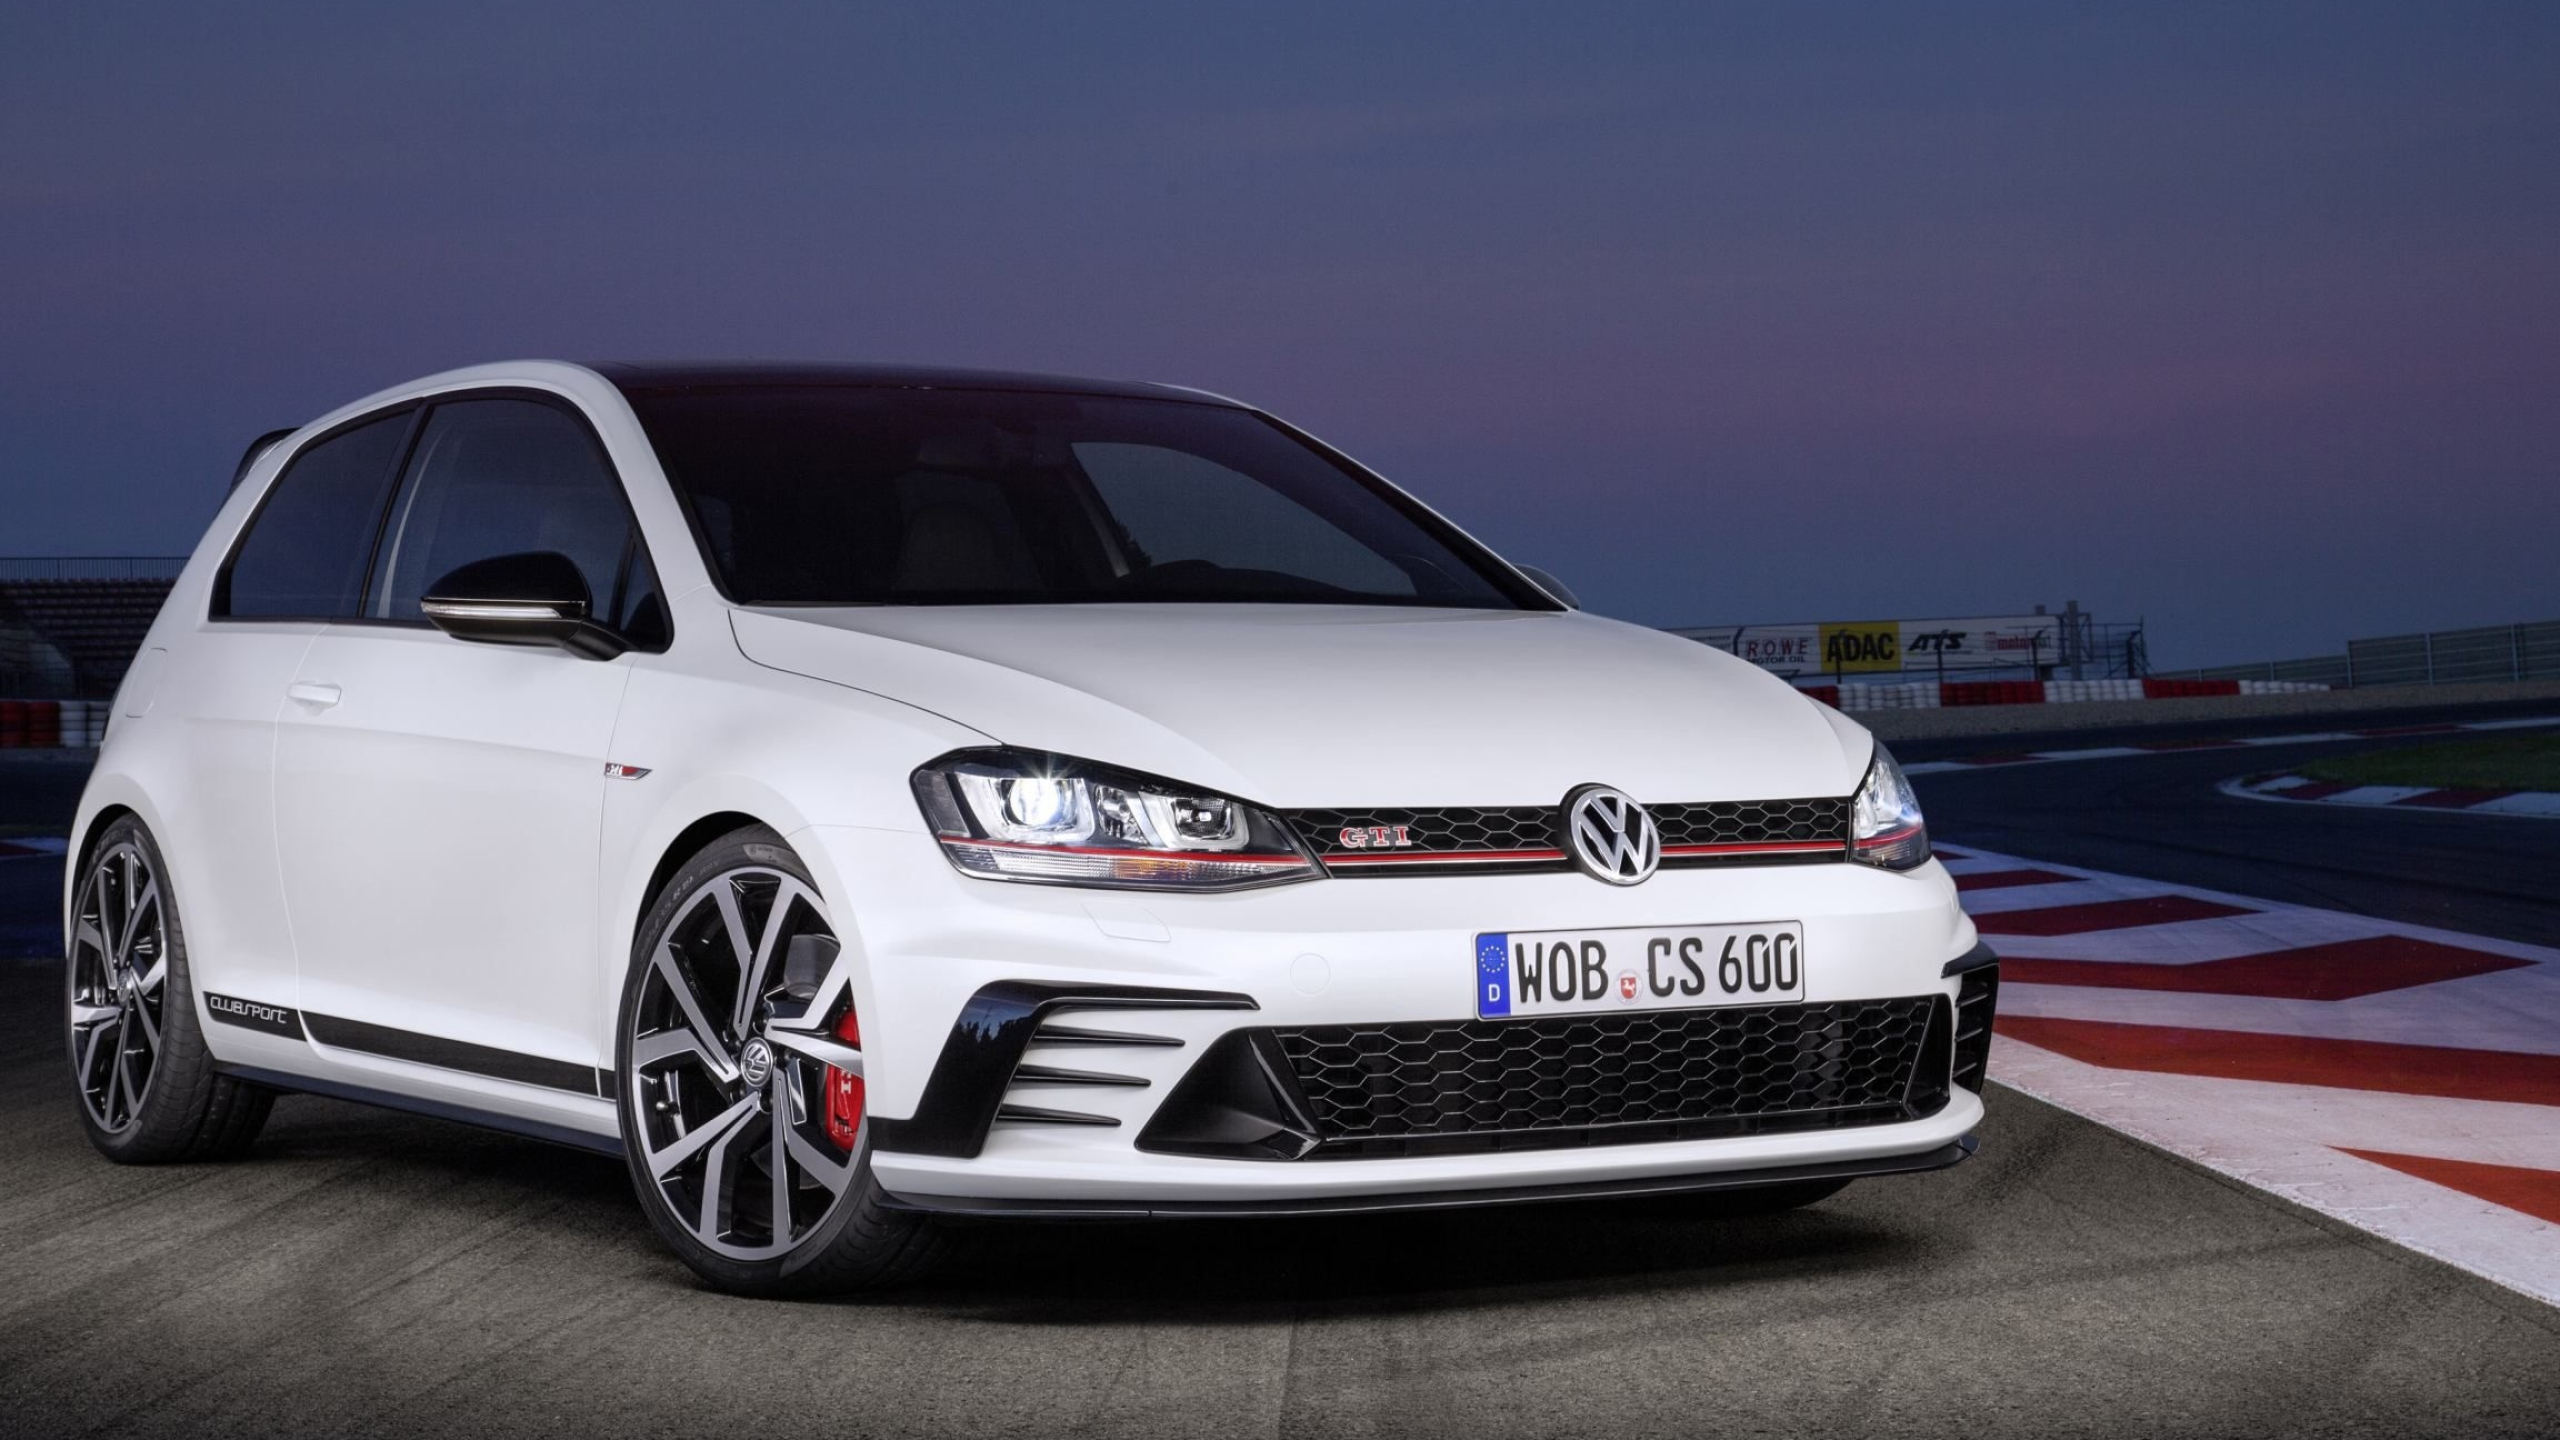 Golf GTI: A high-performance gasoline model powered by a 2.0-litre turbocharged direct-injection petrol engine. 2560x1440 HD Wallpaper.